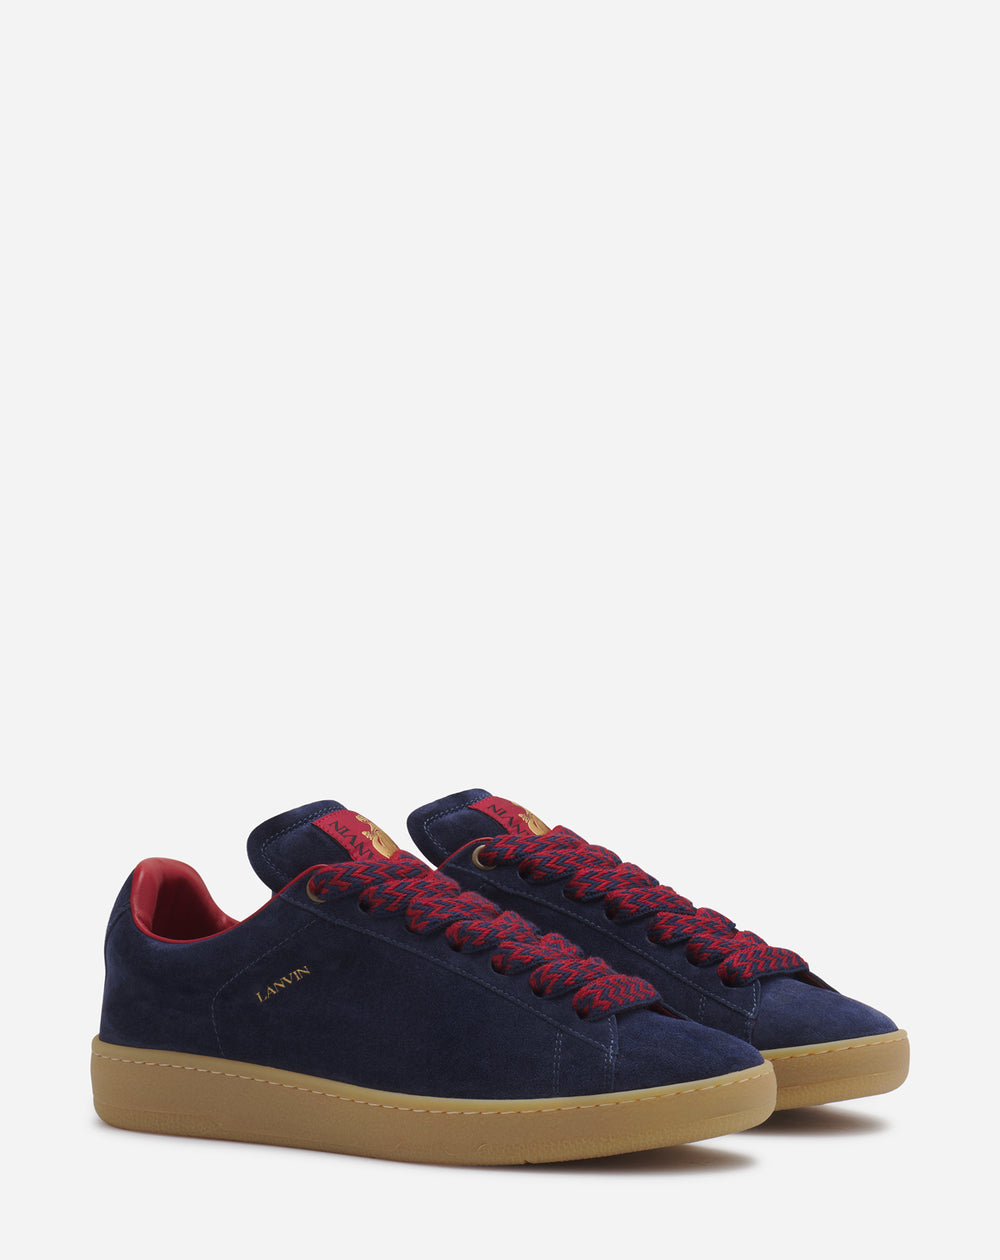 SUEDE LITE CURB SNEAKERS NAVY BLUE/RED | Lanvin – LANVIN